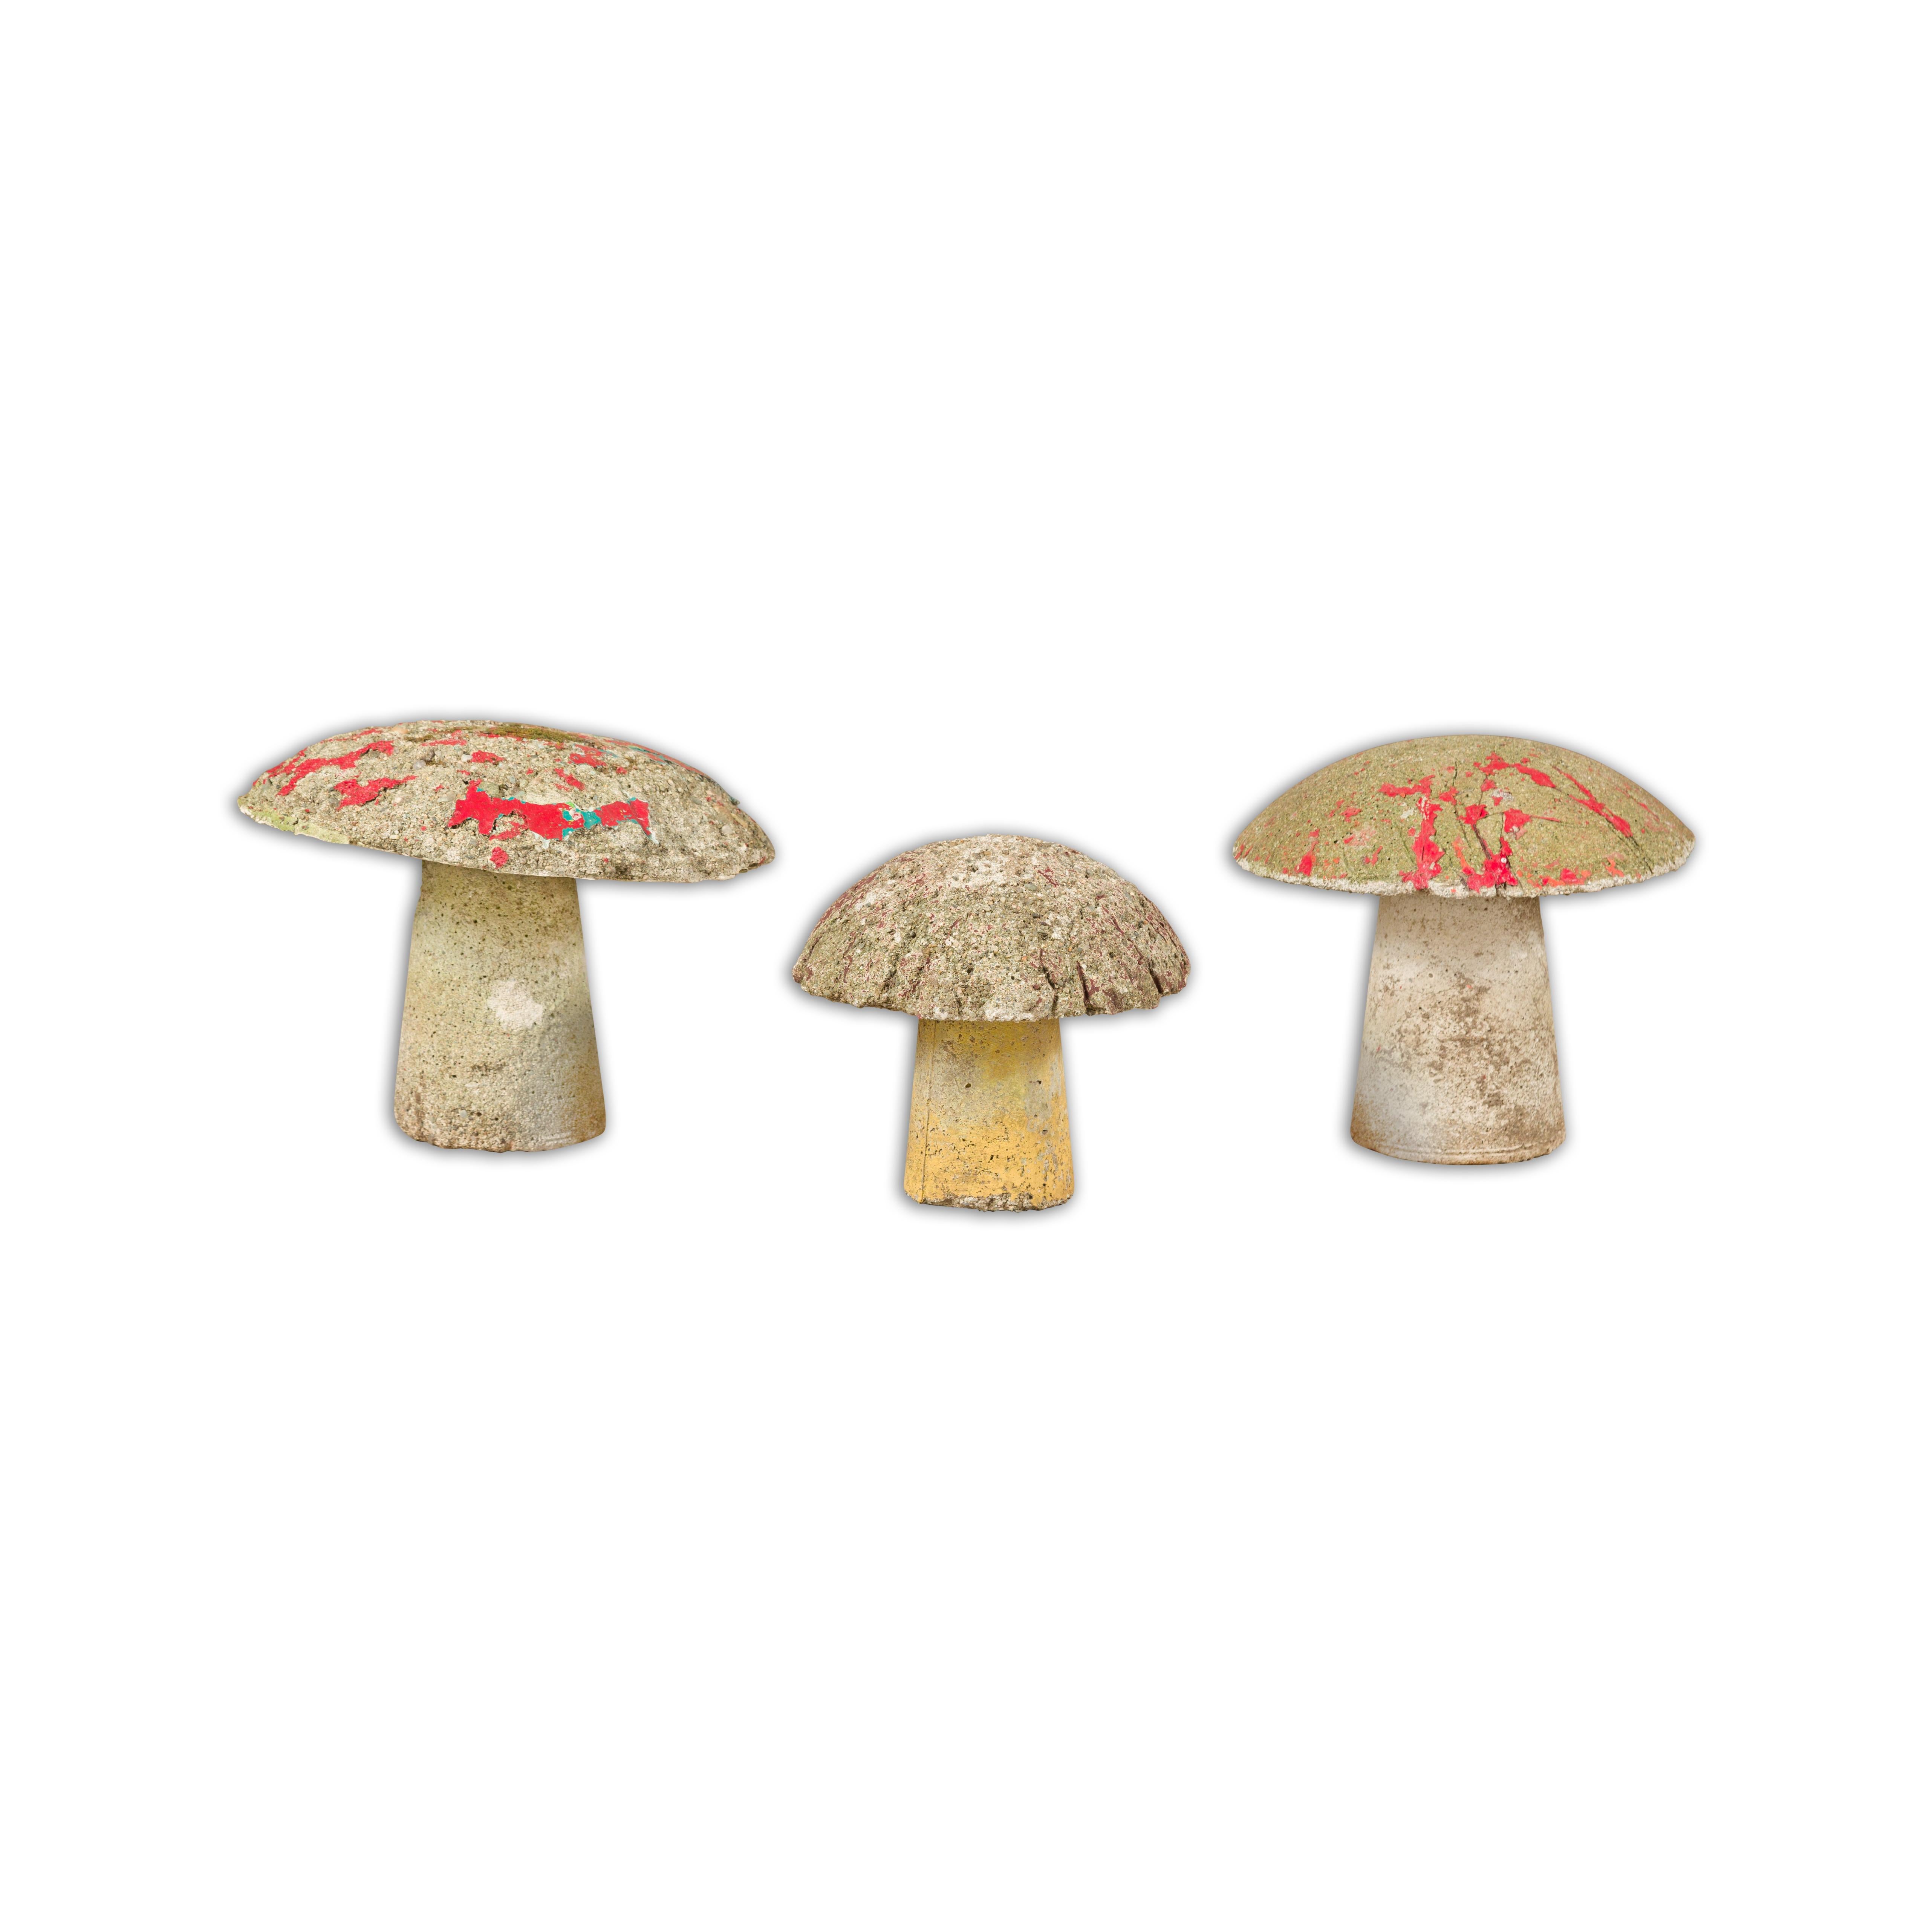 A set of three American Midcentury painted concrete mushroom garden ornaments with traces of red, turquoise and yellow paint and nicely weathered appearance. Introduce a dash of whimsy and a sprinkle of nostalgia into your garden with this set of